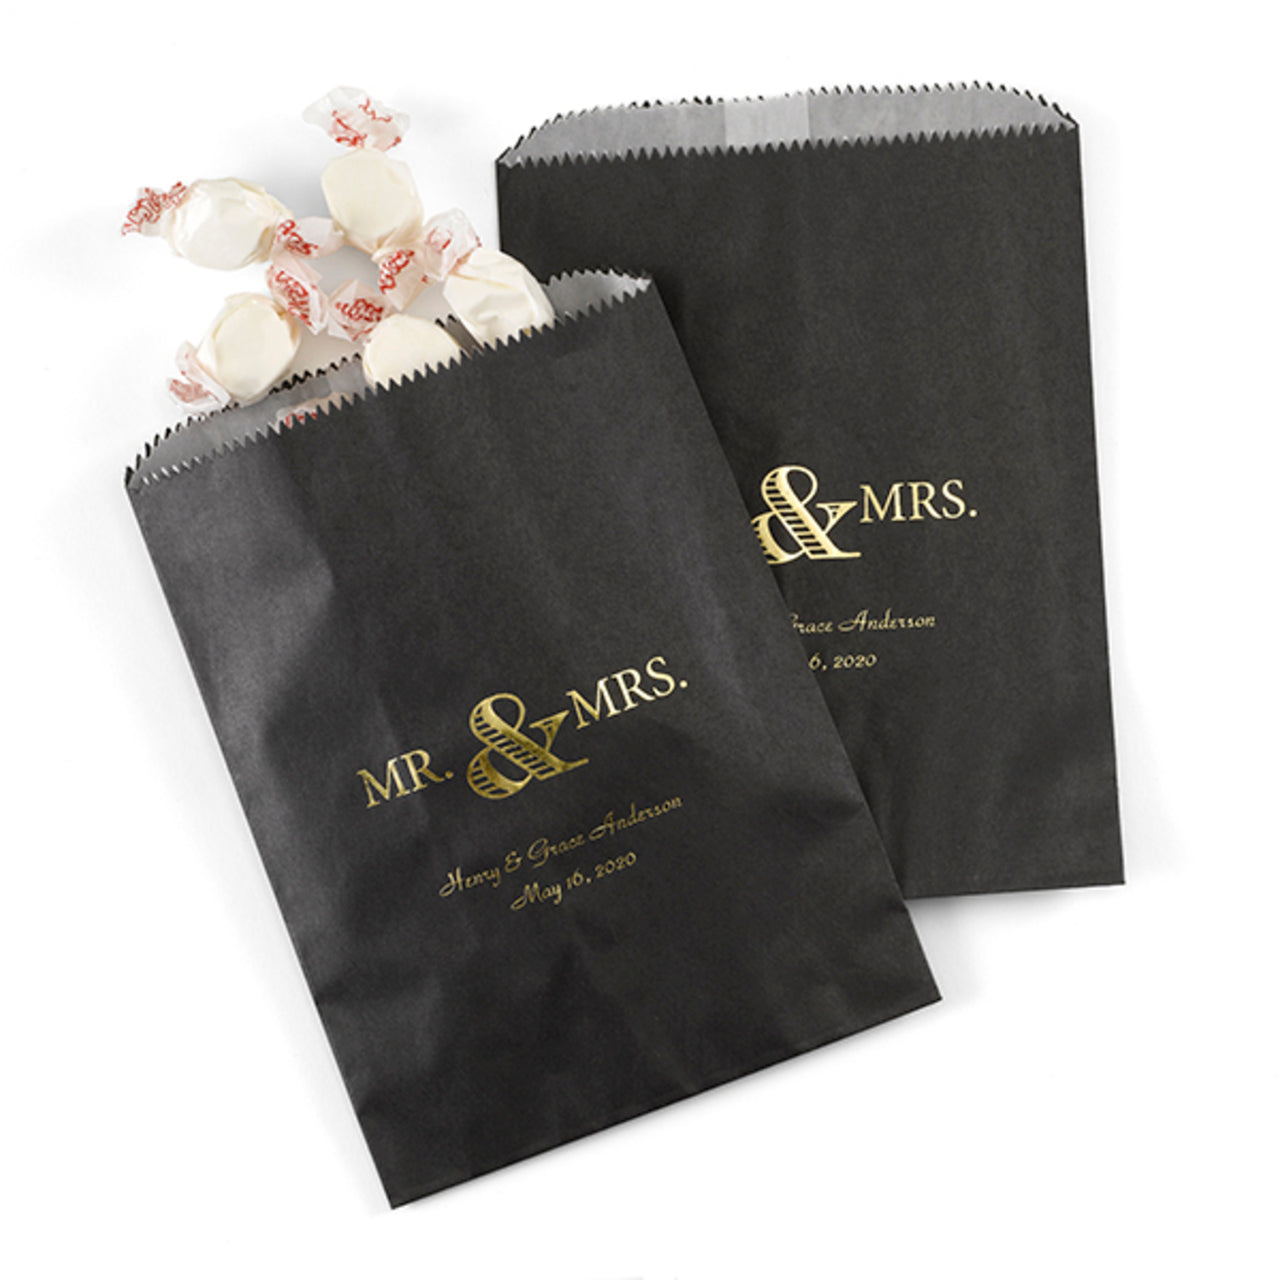 Personalized Mr. & Mrs. Treat Bags (Available in Multiple Colors) (Set of 50) - Alternate Image 2 | My Wedding Favors